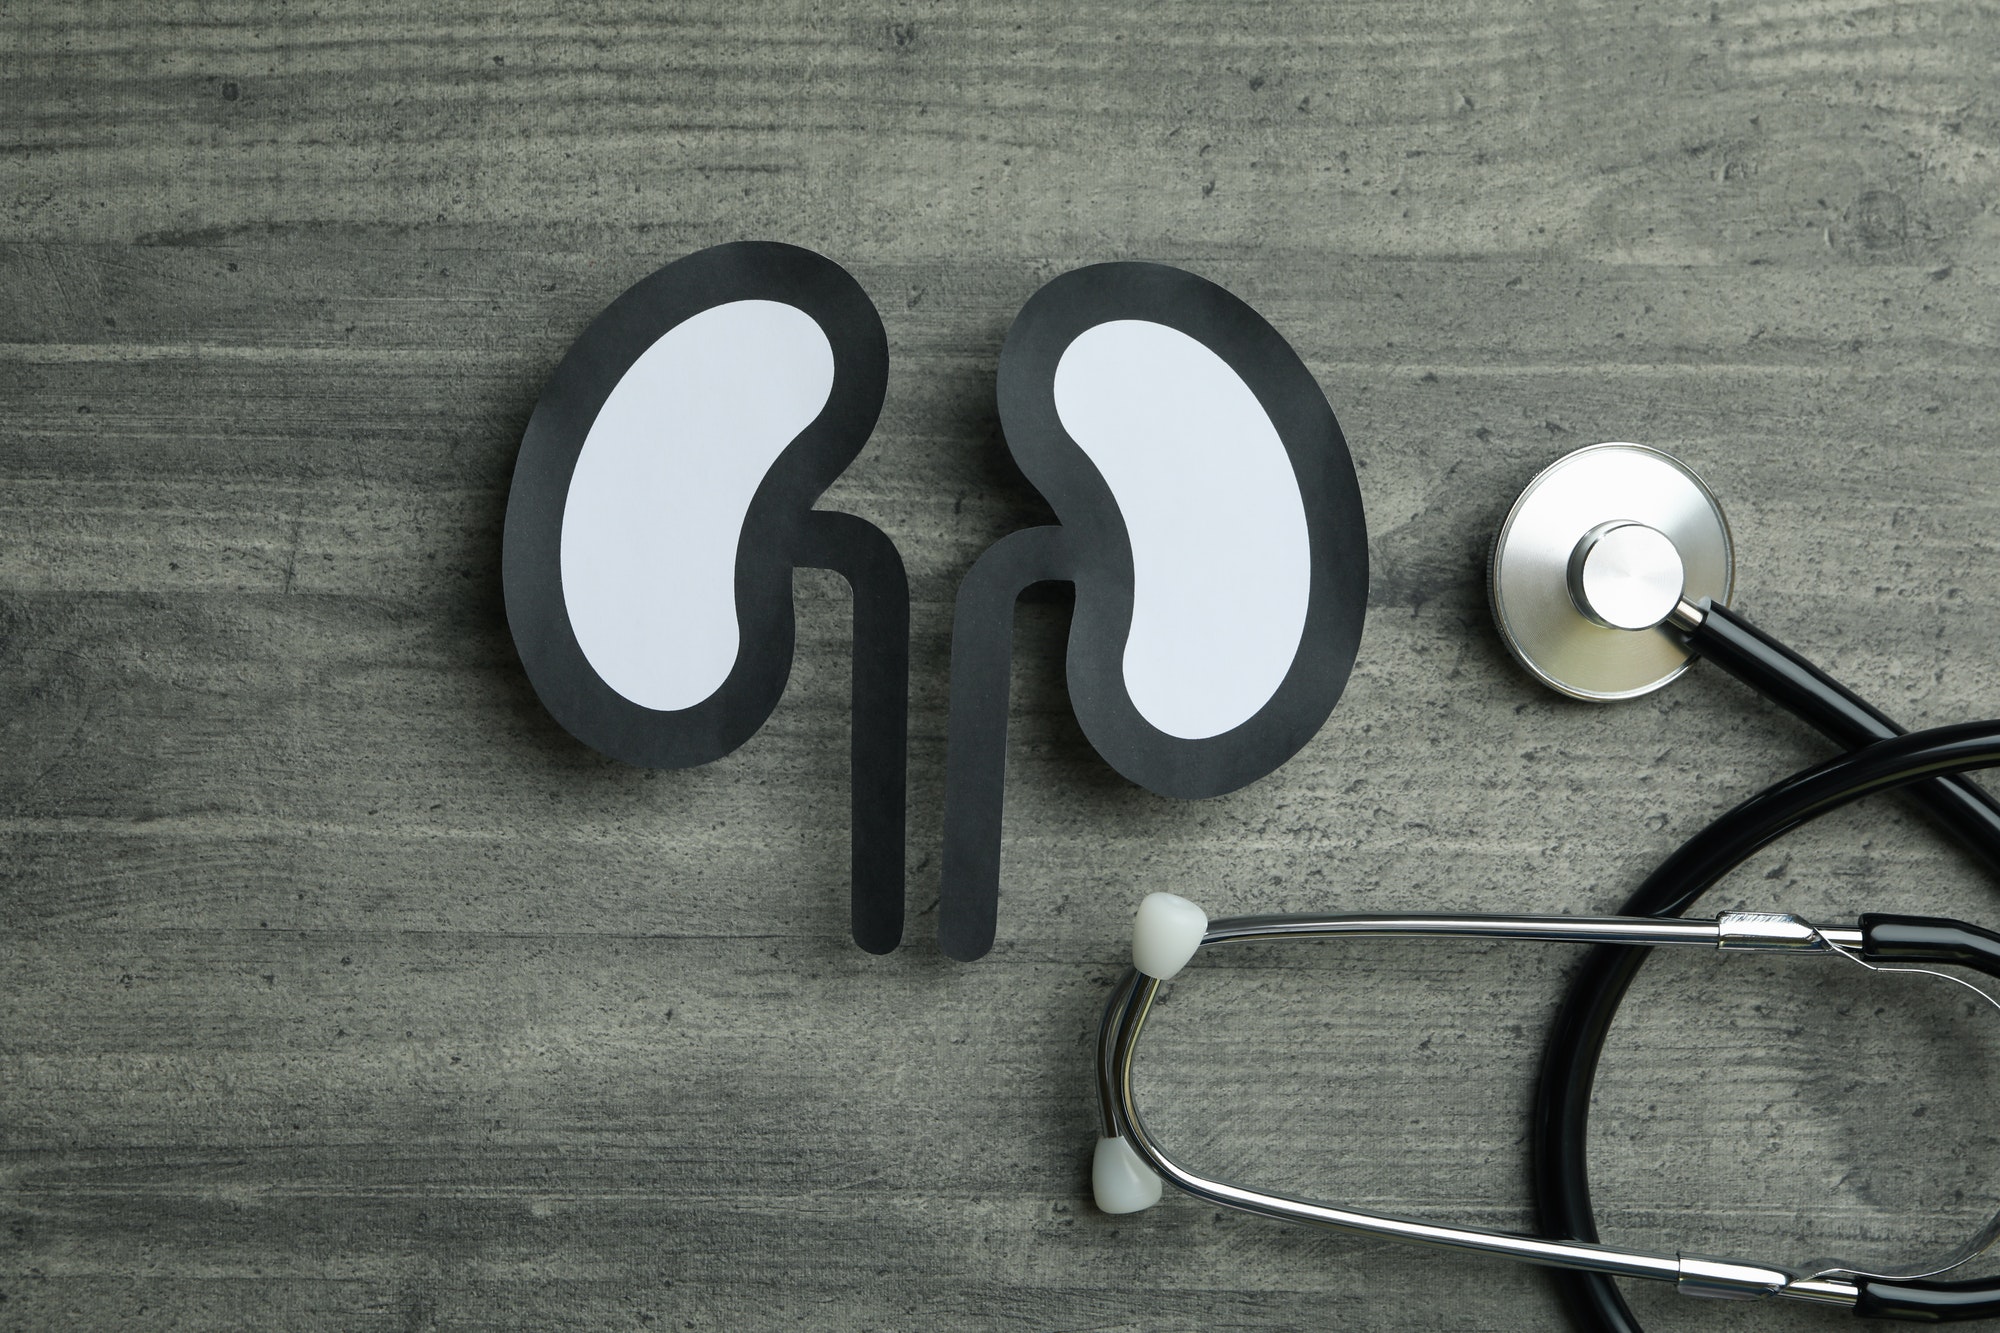 Stethoscope and decorative kidneys on gray textured background